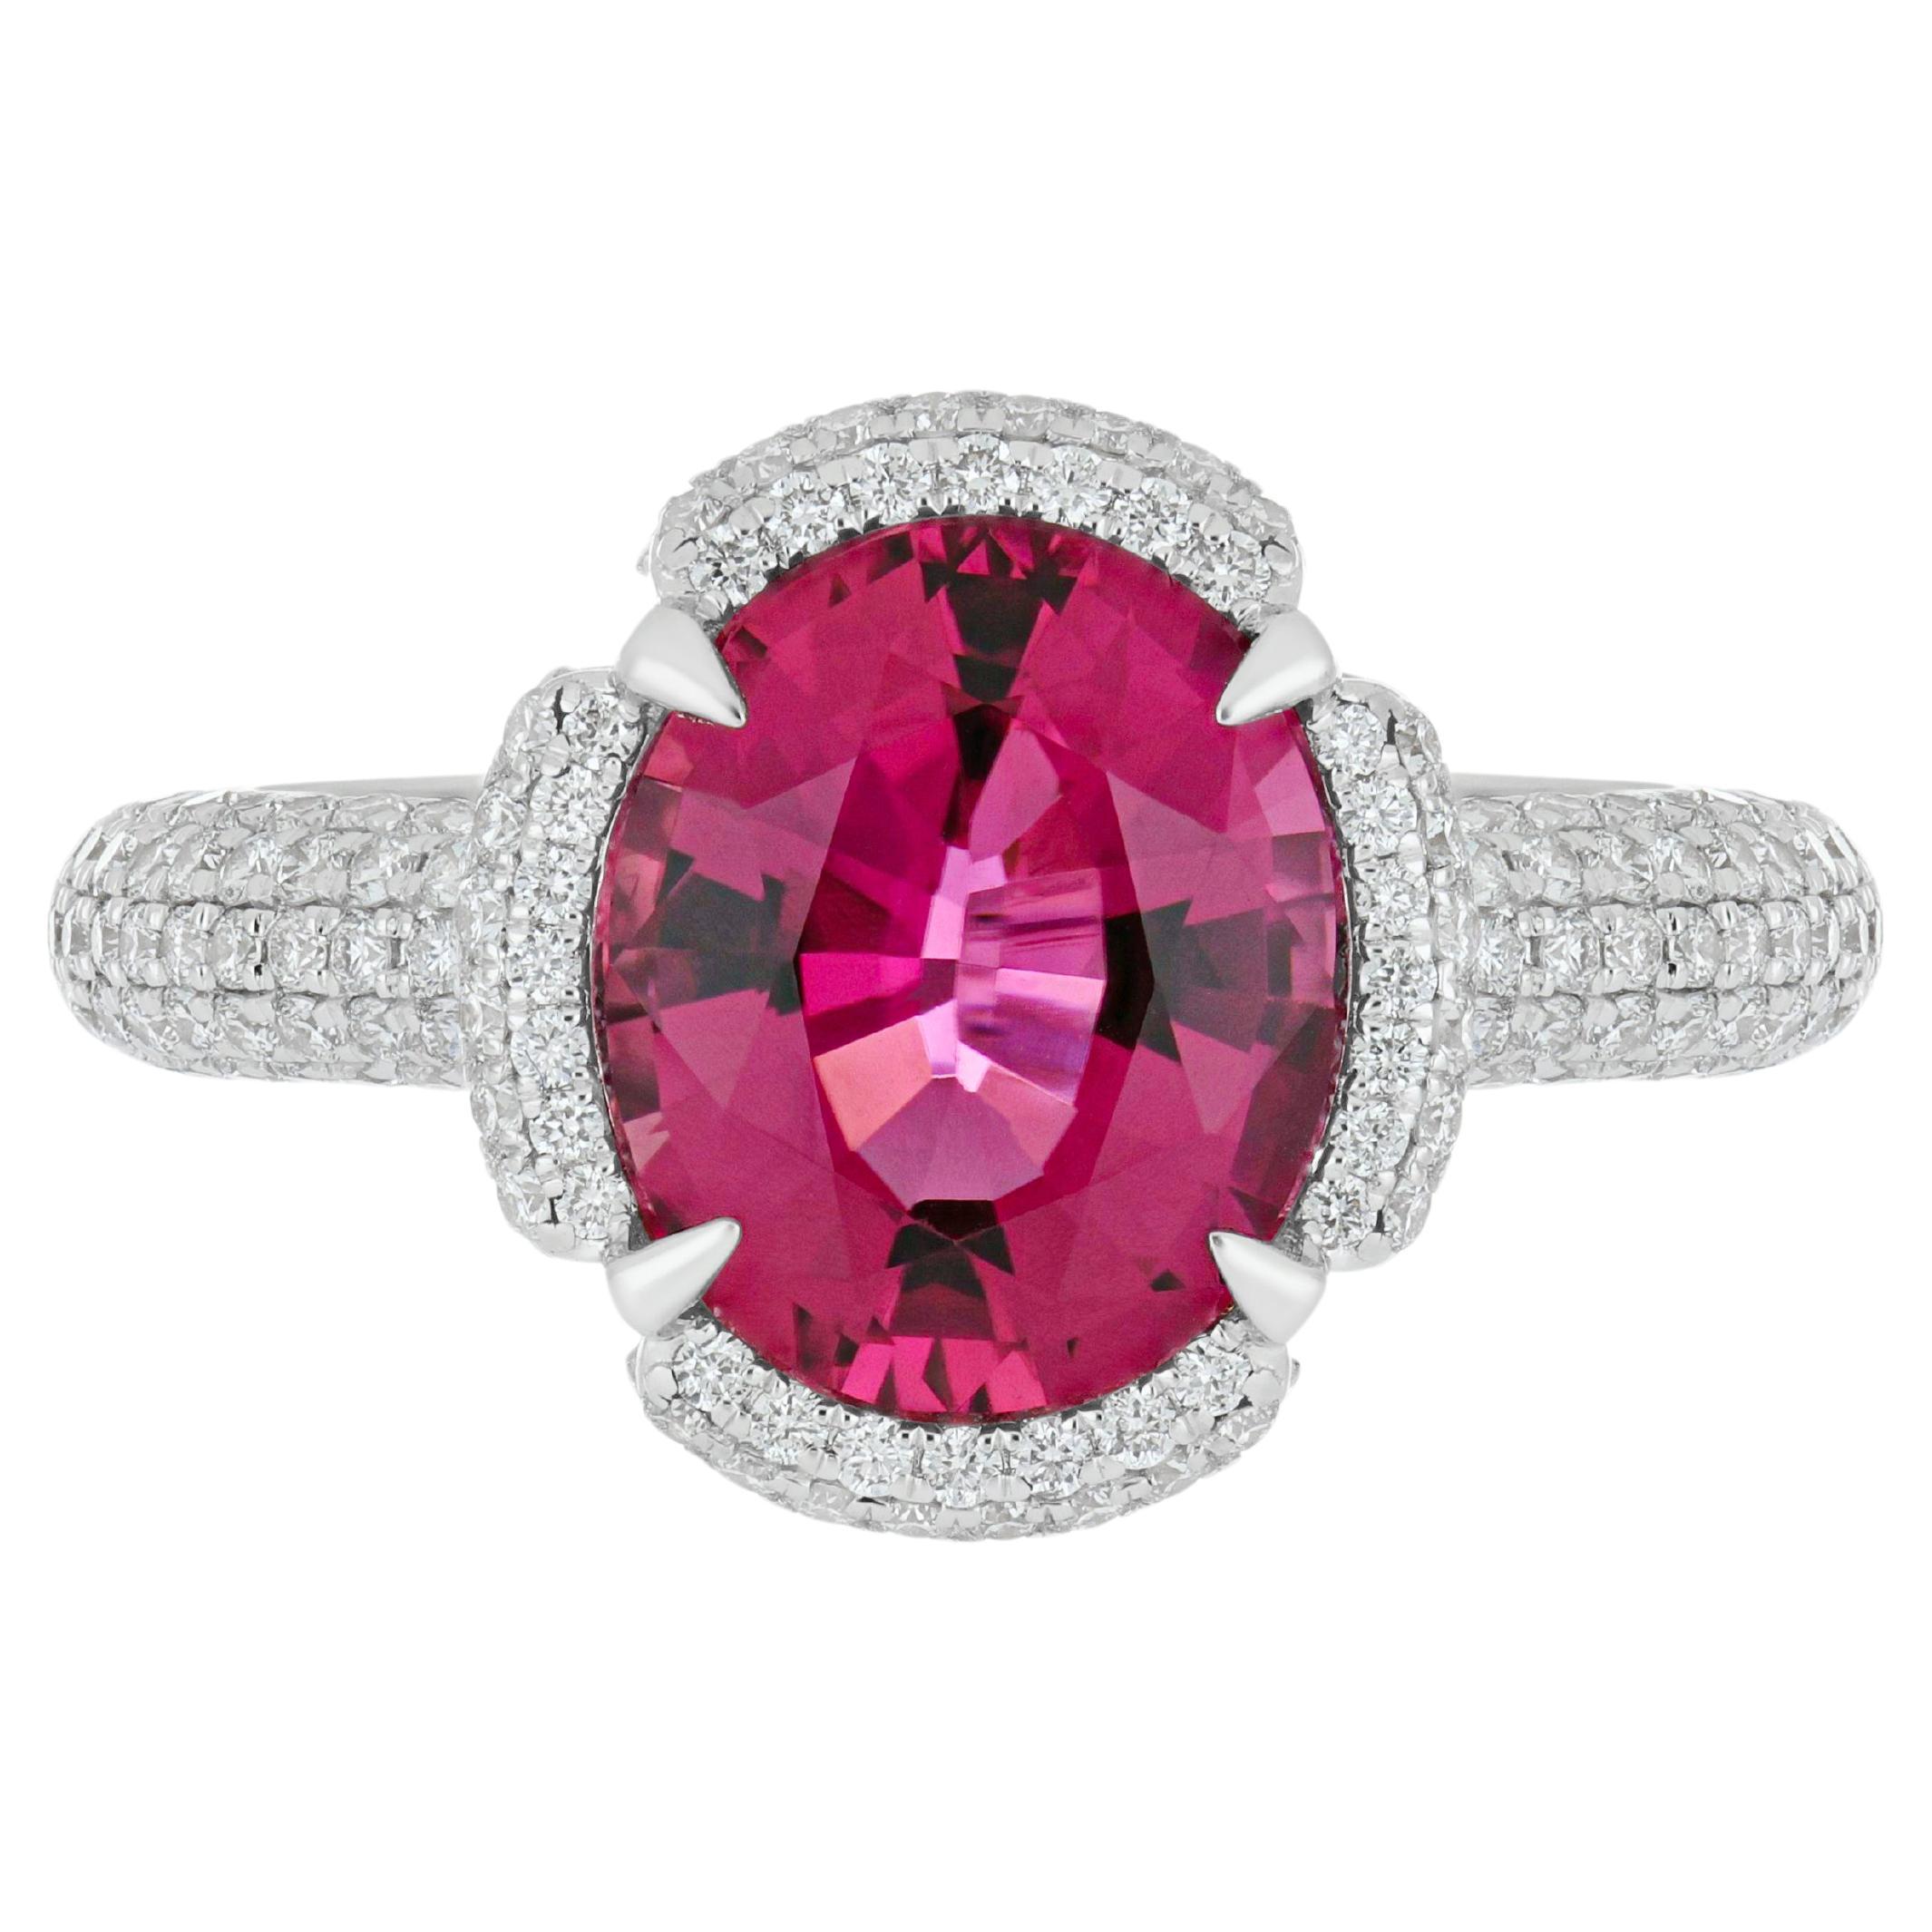 4.3 Carat Rubellite and Diamond Studded Ring in 18K White Gold Ring For Sale